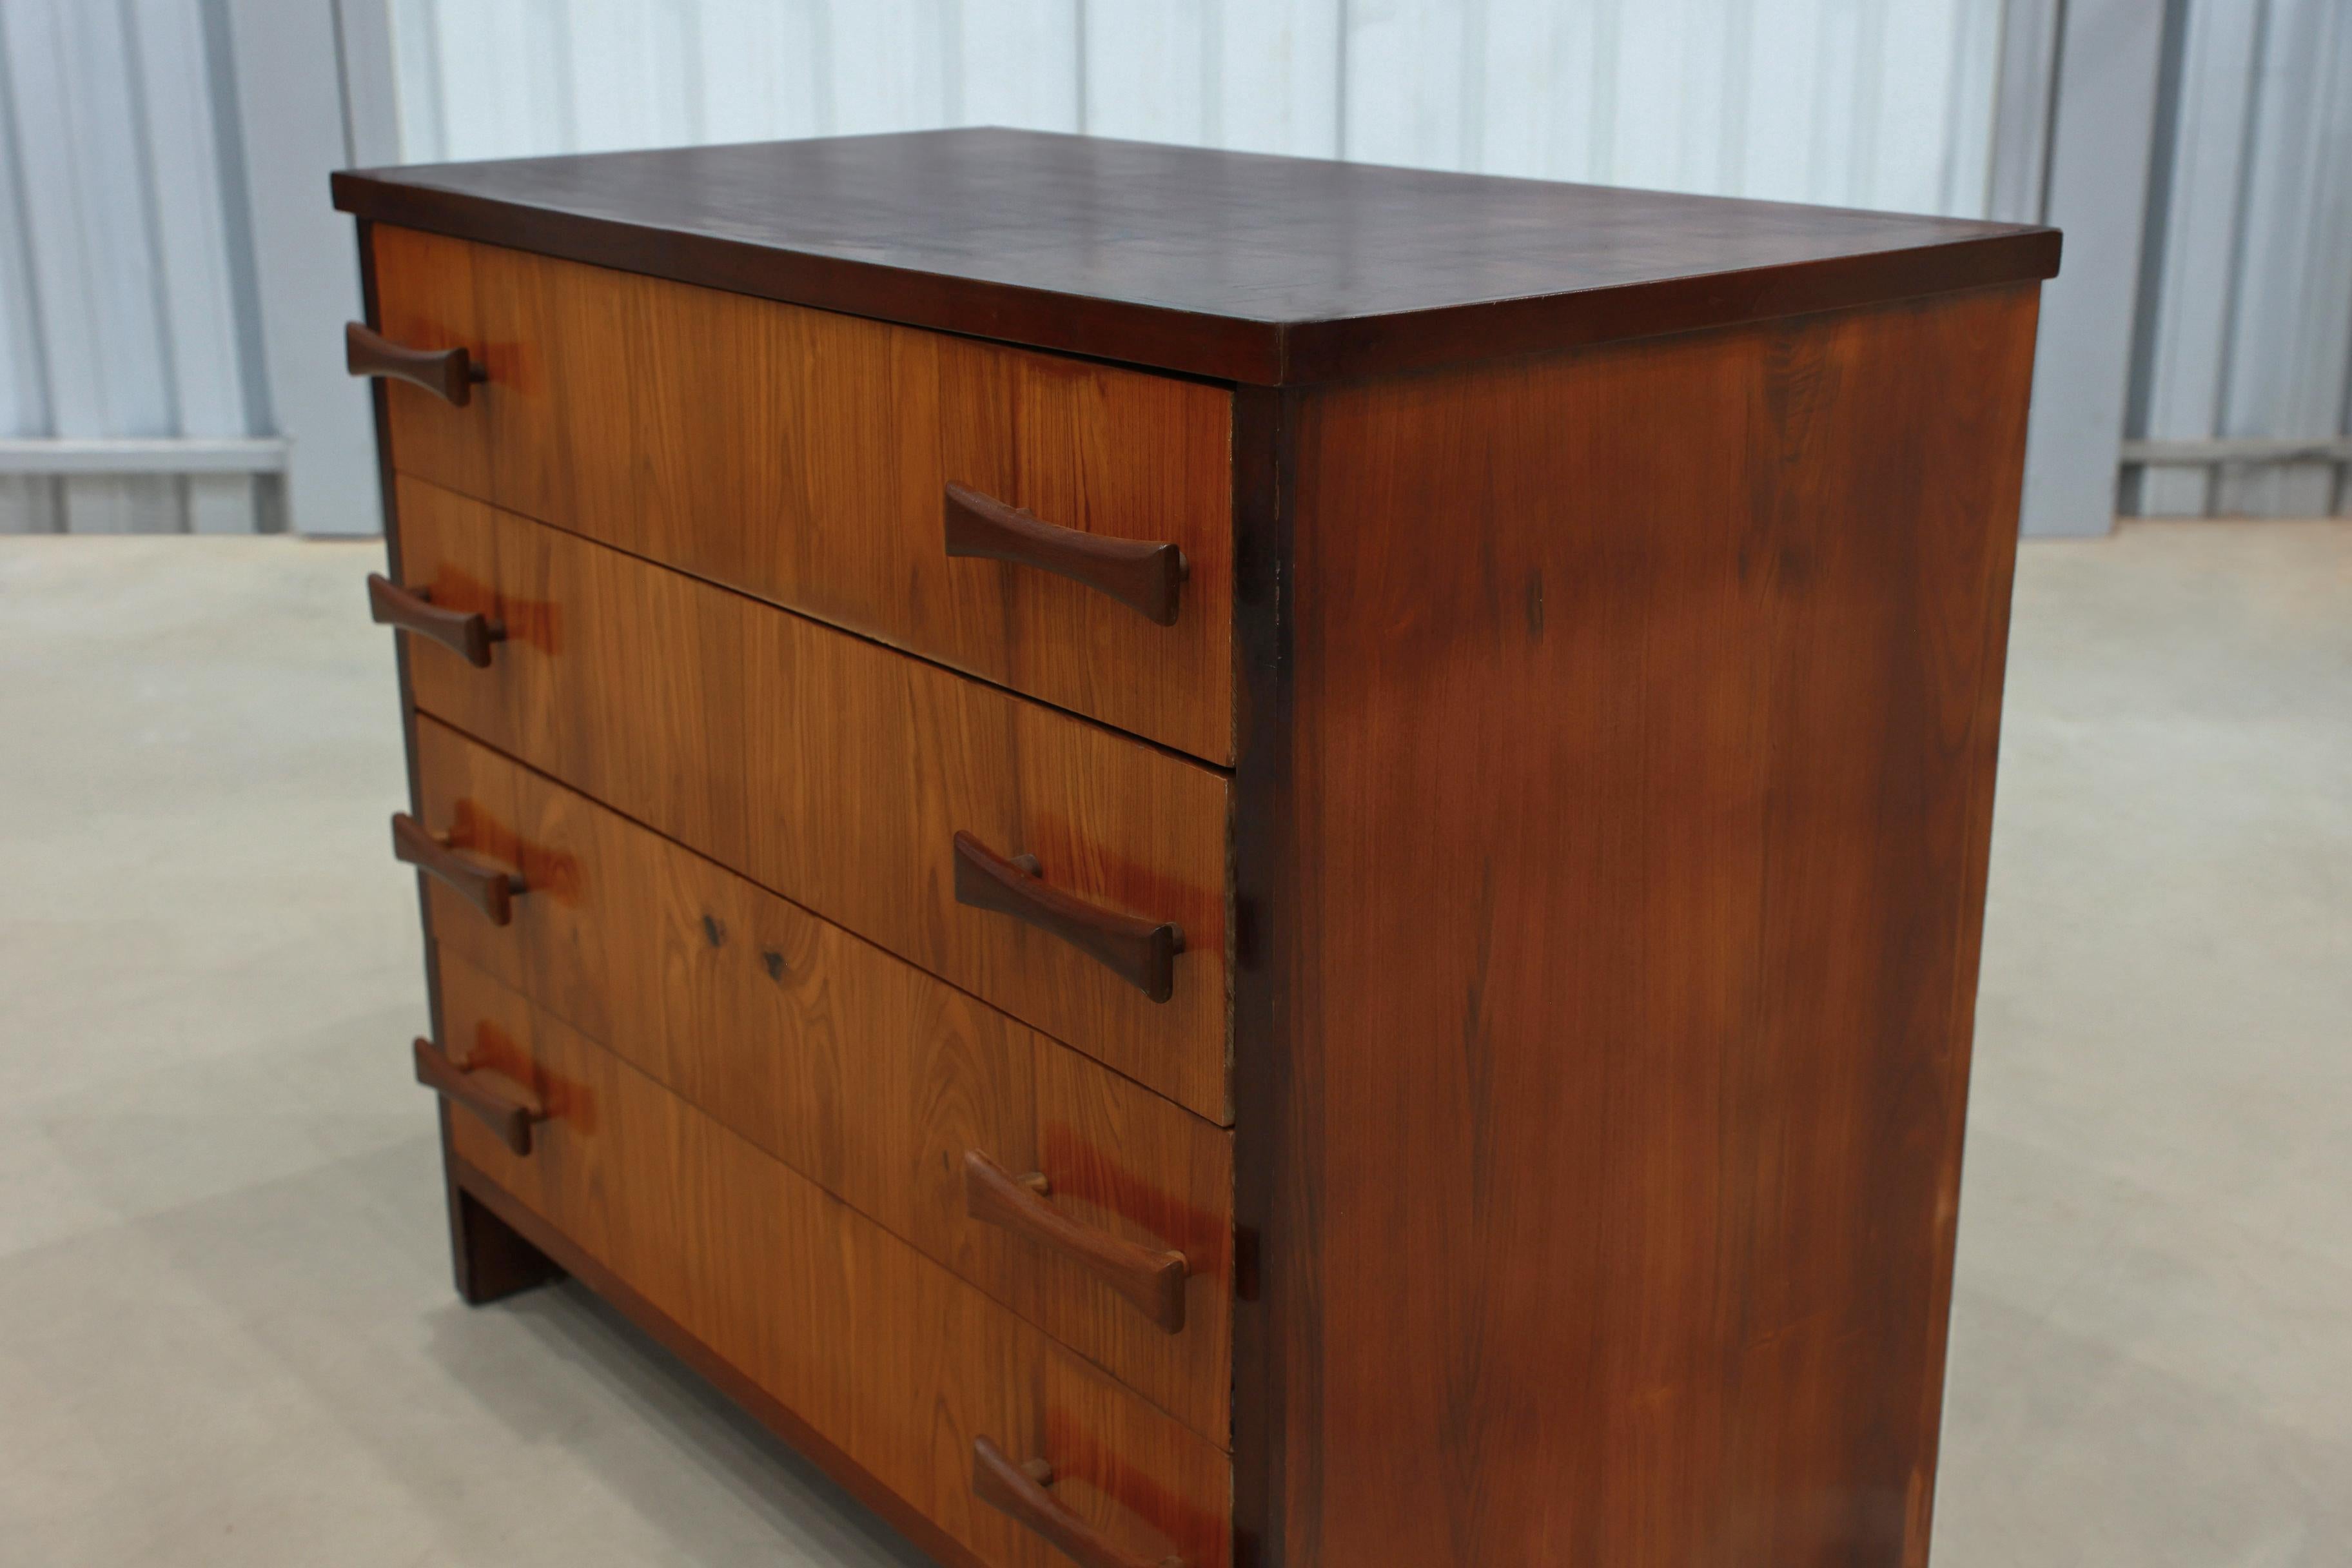 Mid-Century Modern Chest of Drawers in Caviuna wood, Unknown, c. 1950 For Sale 2